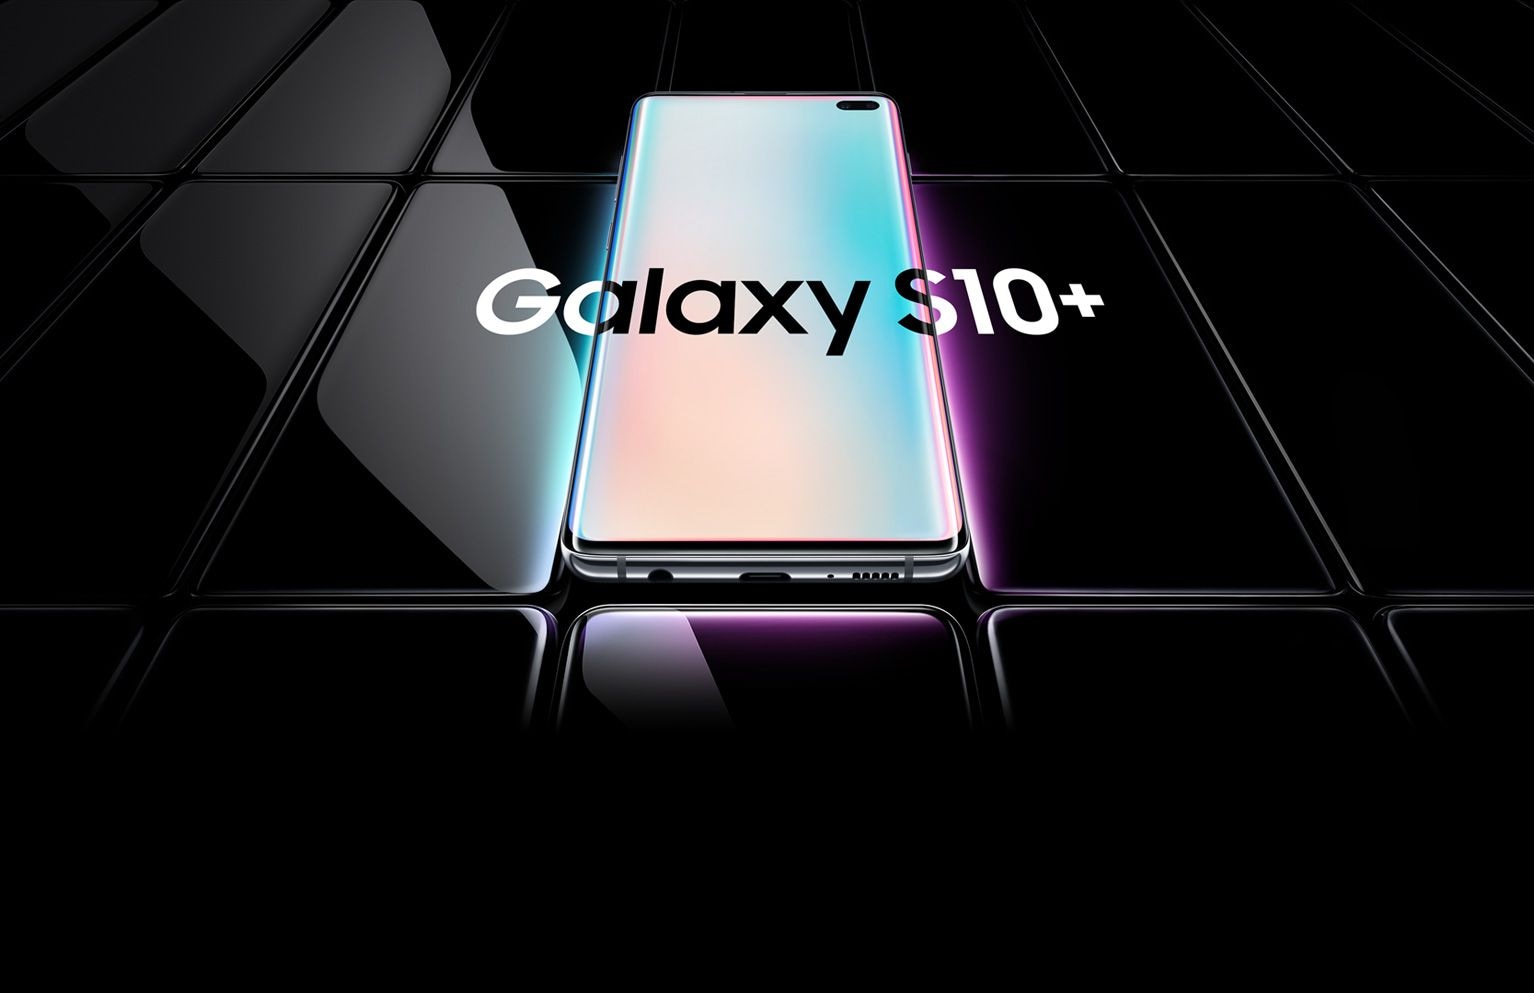 Several Galaxy S10 plus phones all laid flat and seen at an angle. All are black except the one in the middle, which is shown with a prismatic gradient onscreen with Galaxy S10 plus overlaid on top of it and the two phones on either side.